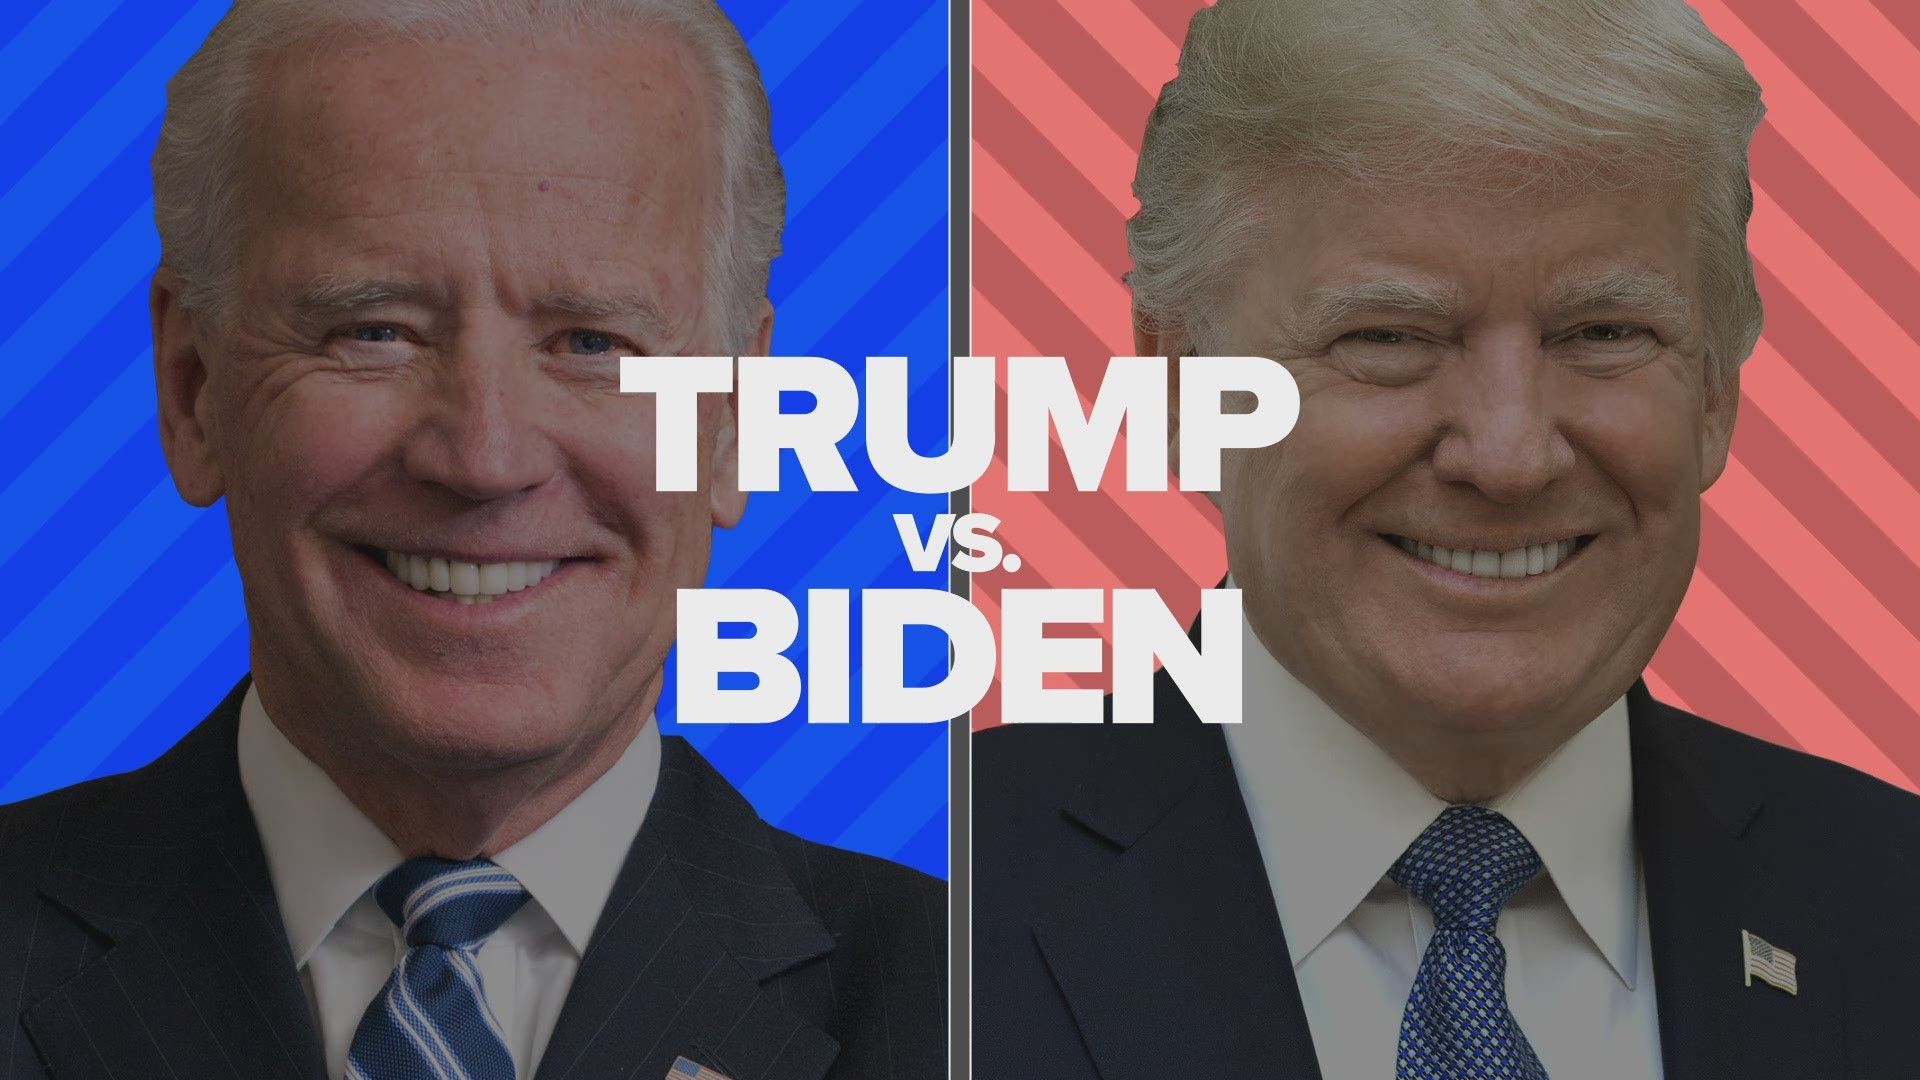 Where does Preident Trump and Joe Biden stand on major issues